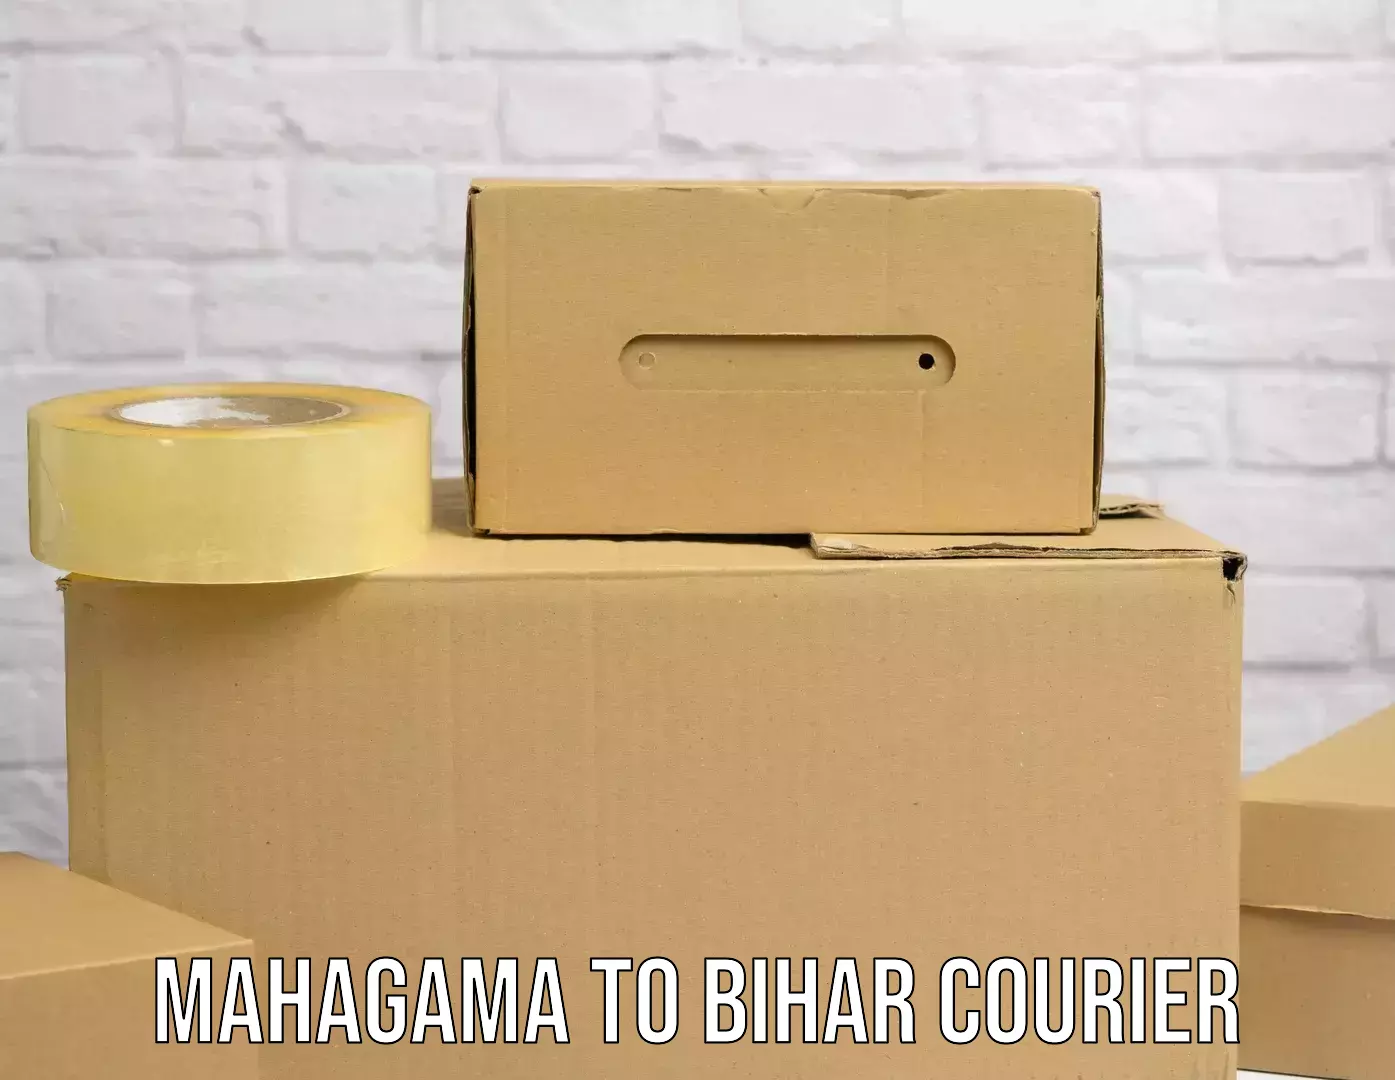 User-friendly delivery service Mahagama to Rajpur